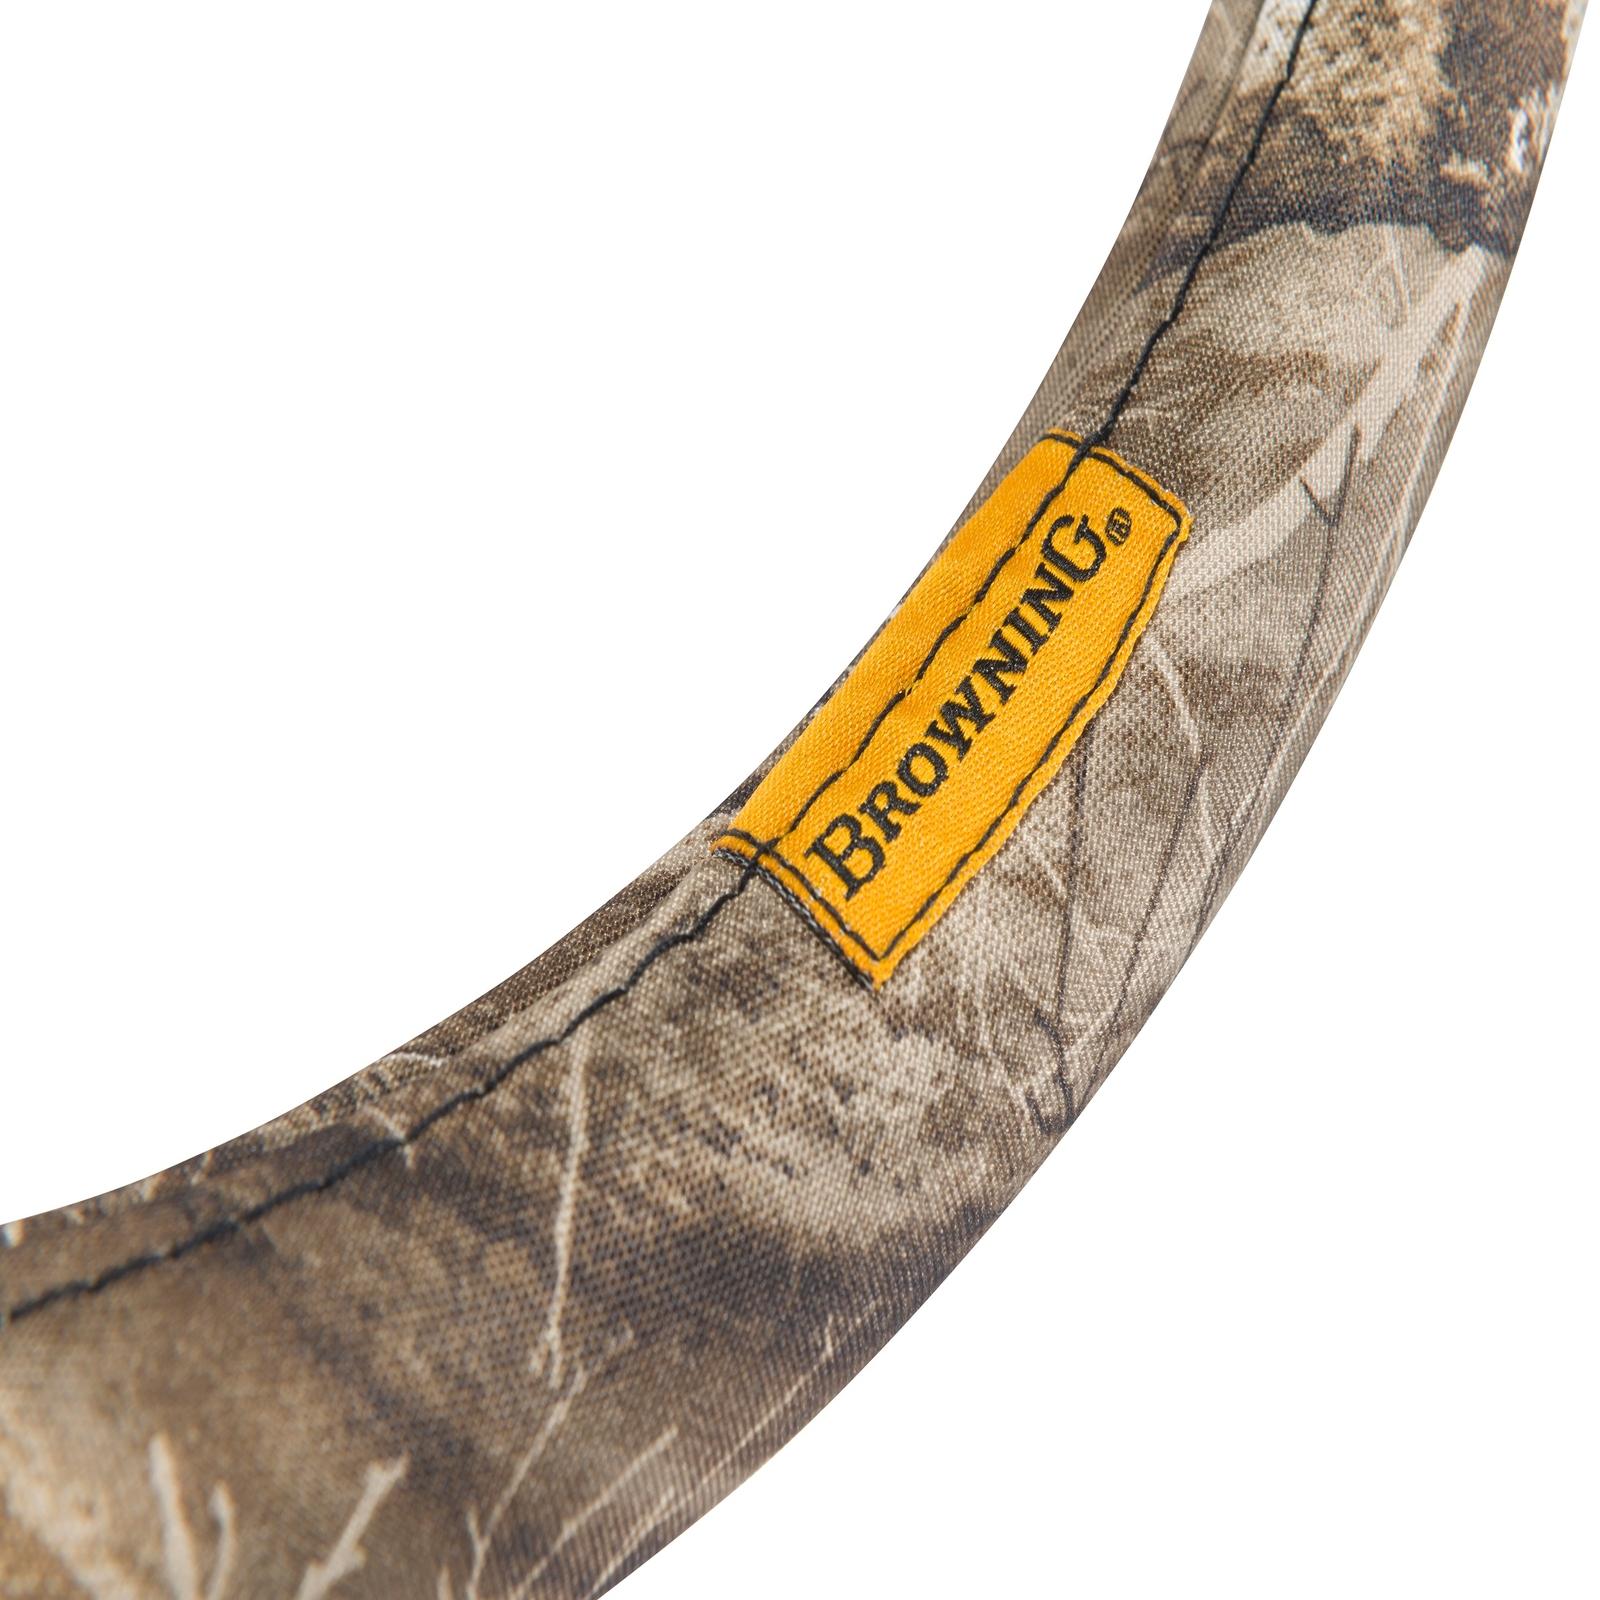 Browning Excursion Steering Wheel Cover